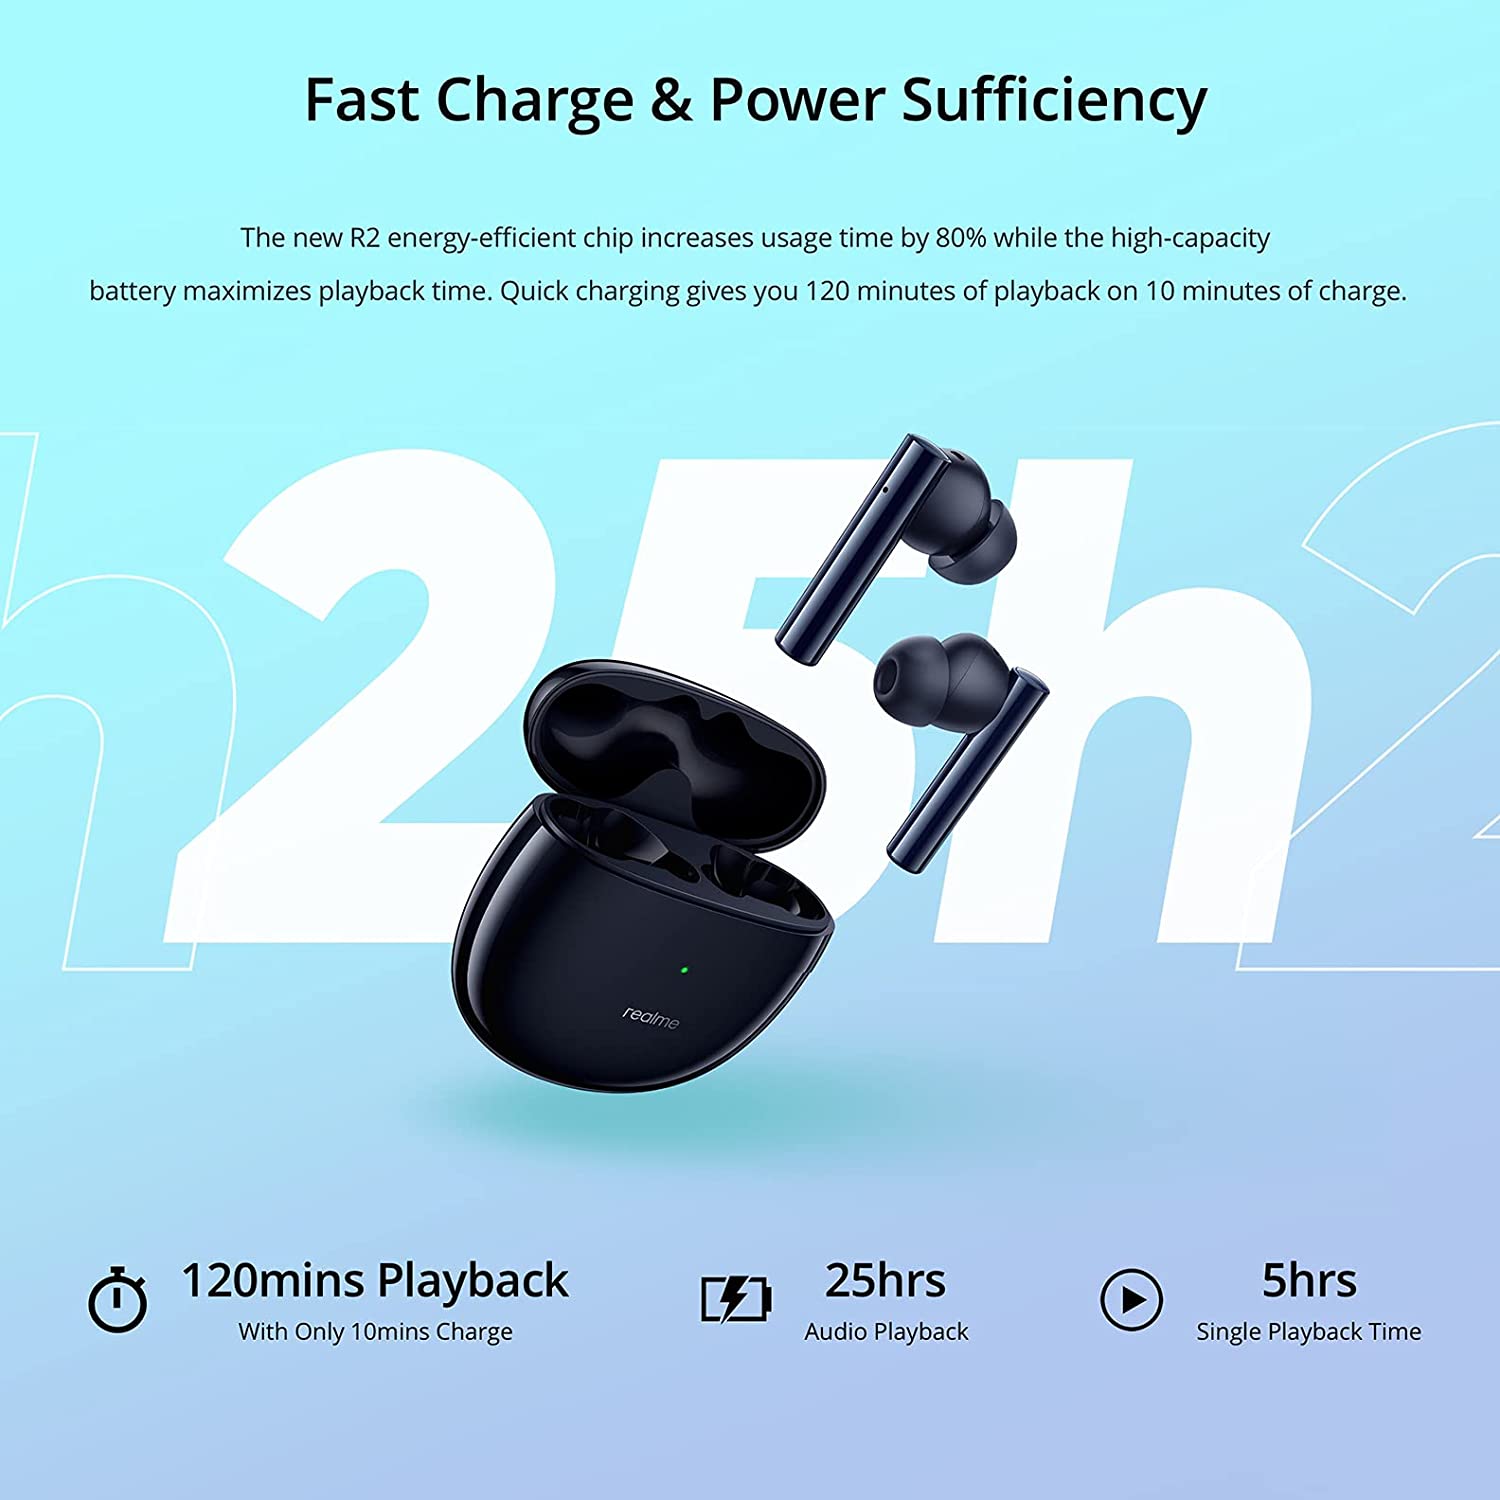 Realme Buds Air 2 Earphone 25h Battery Life IPX5 Waterproof Transparency Mode Active Noise Cancellation Hi-Fi 88ms Super Low Latency Bass Boost Driver, Black